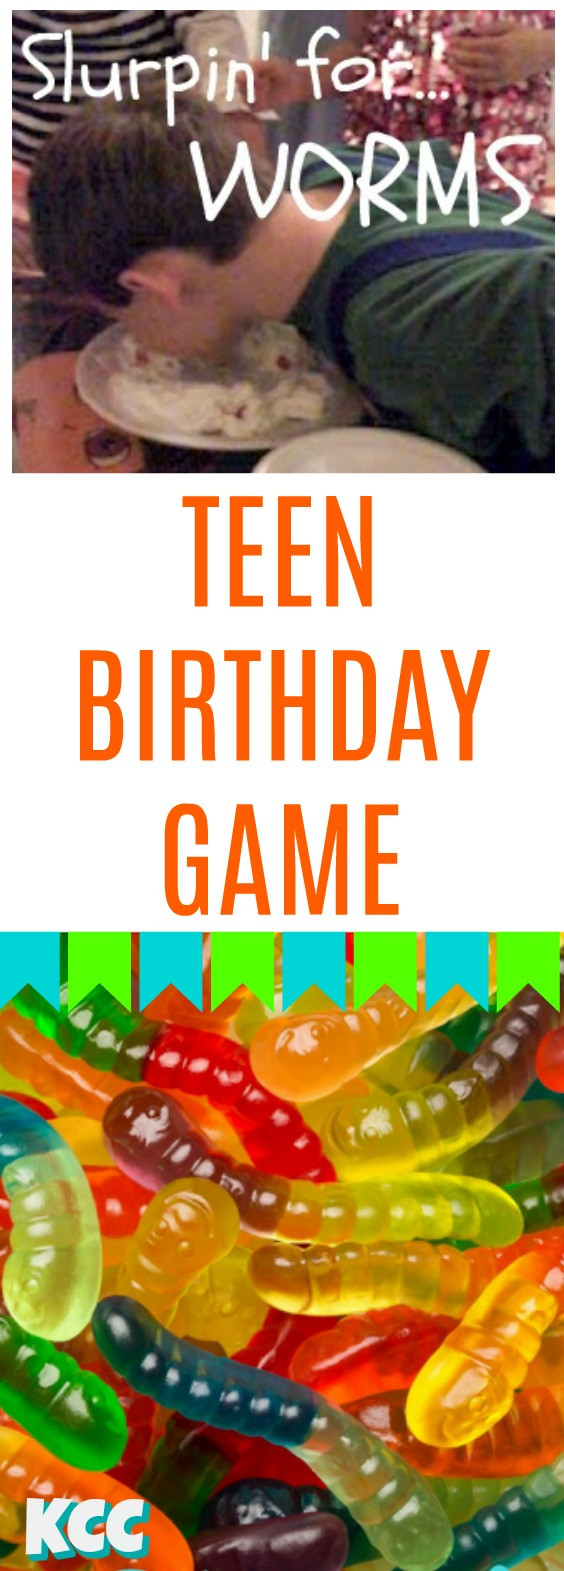 Halloween Party Ideas Teens
 Over 15 Super Fun Halloween Party Game Ideas for Kids and